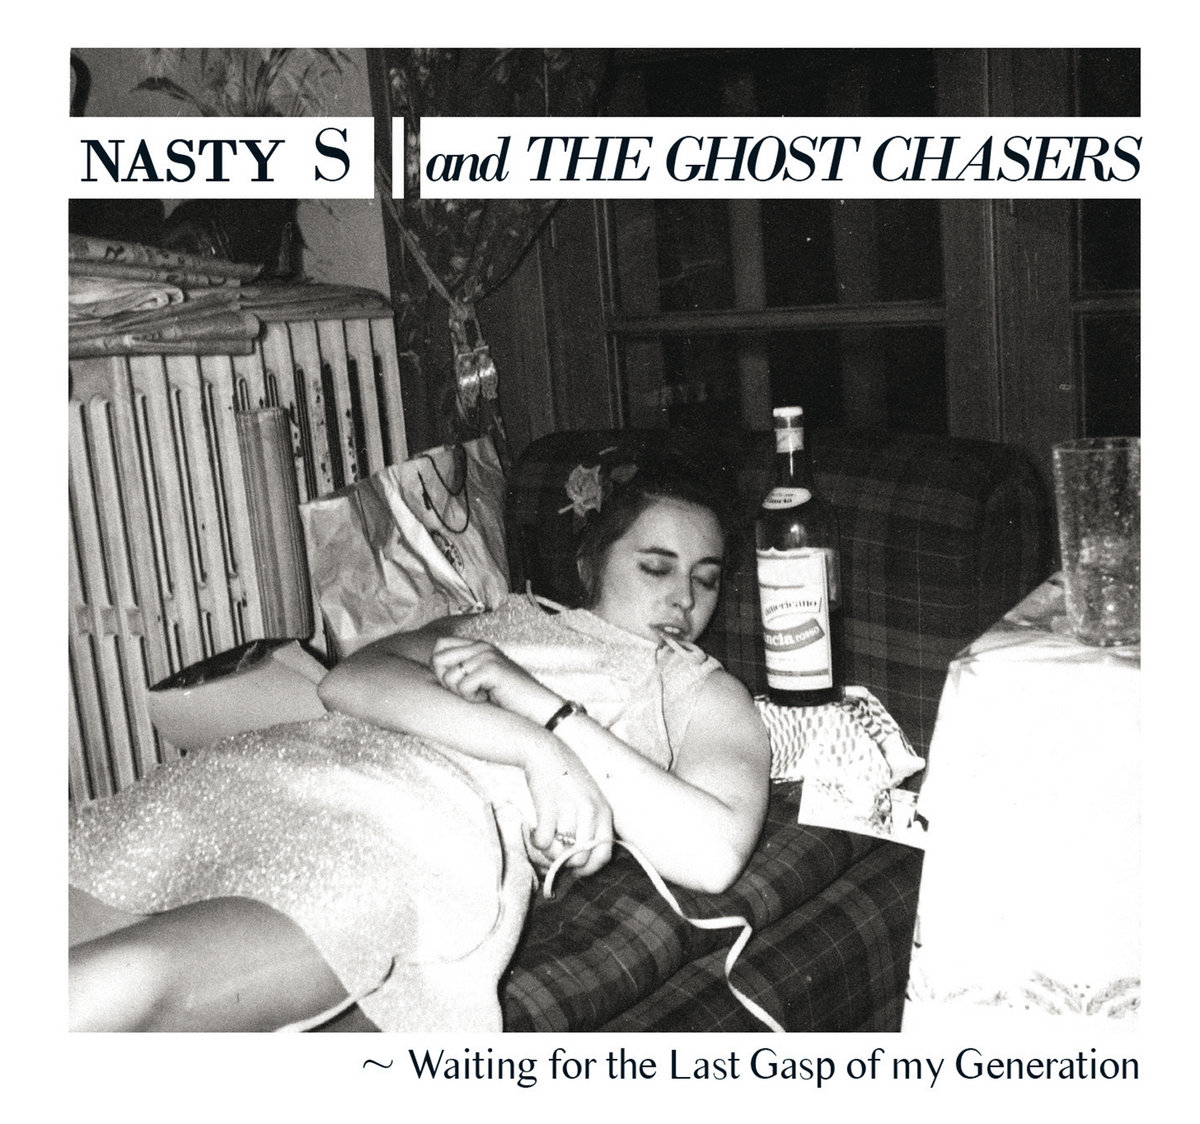 Listen Up – Nasty S And The Ghost Chasers – Waiting for the Last Gasp of my Generation